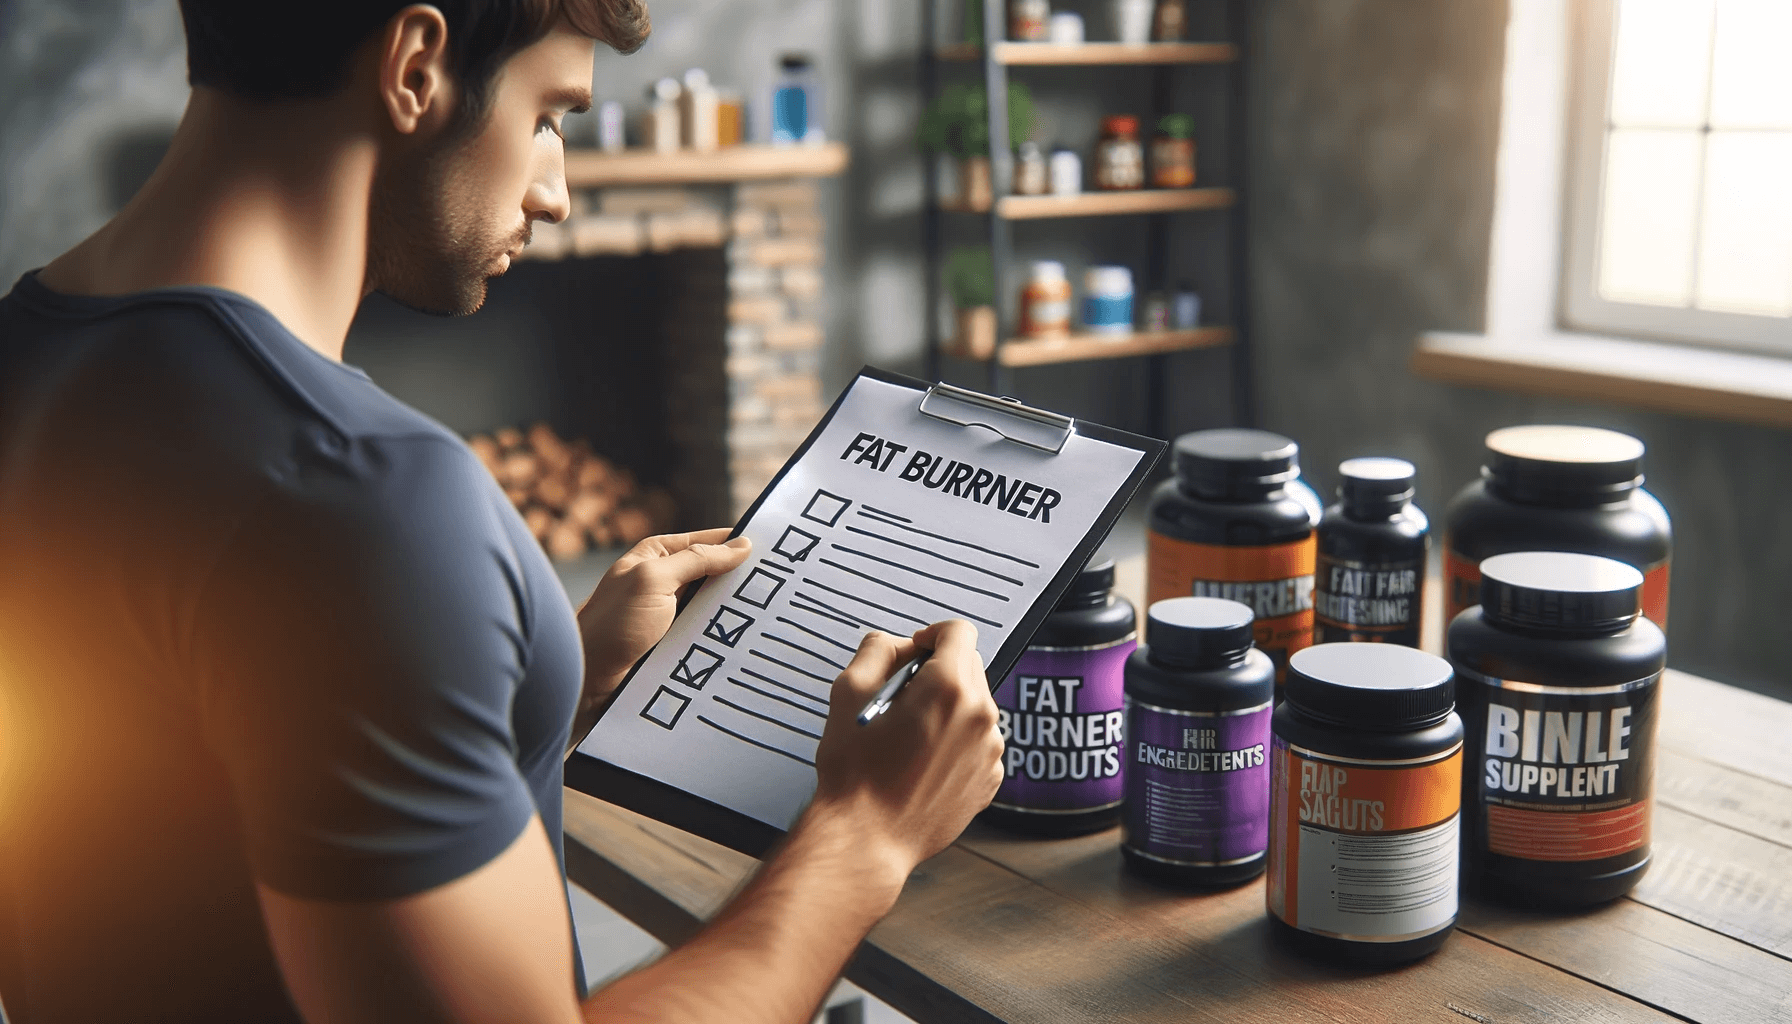 A person with a checklist evaluating different fat burner products, focusing on making an informed choice